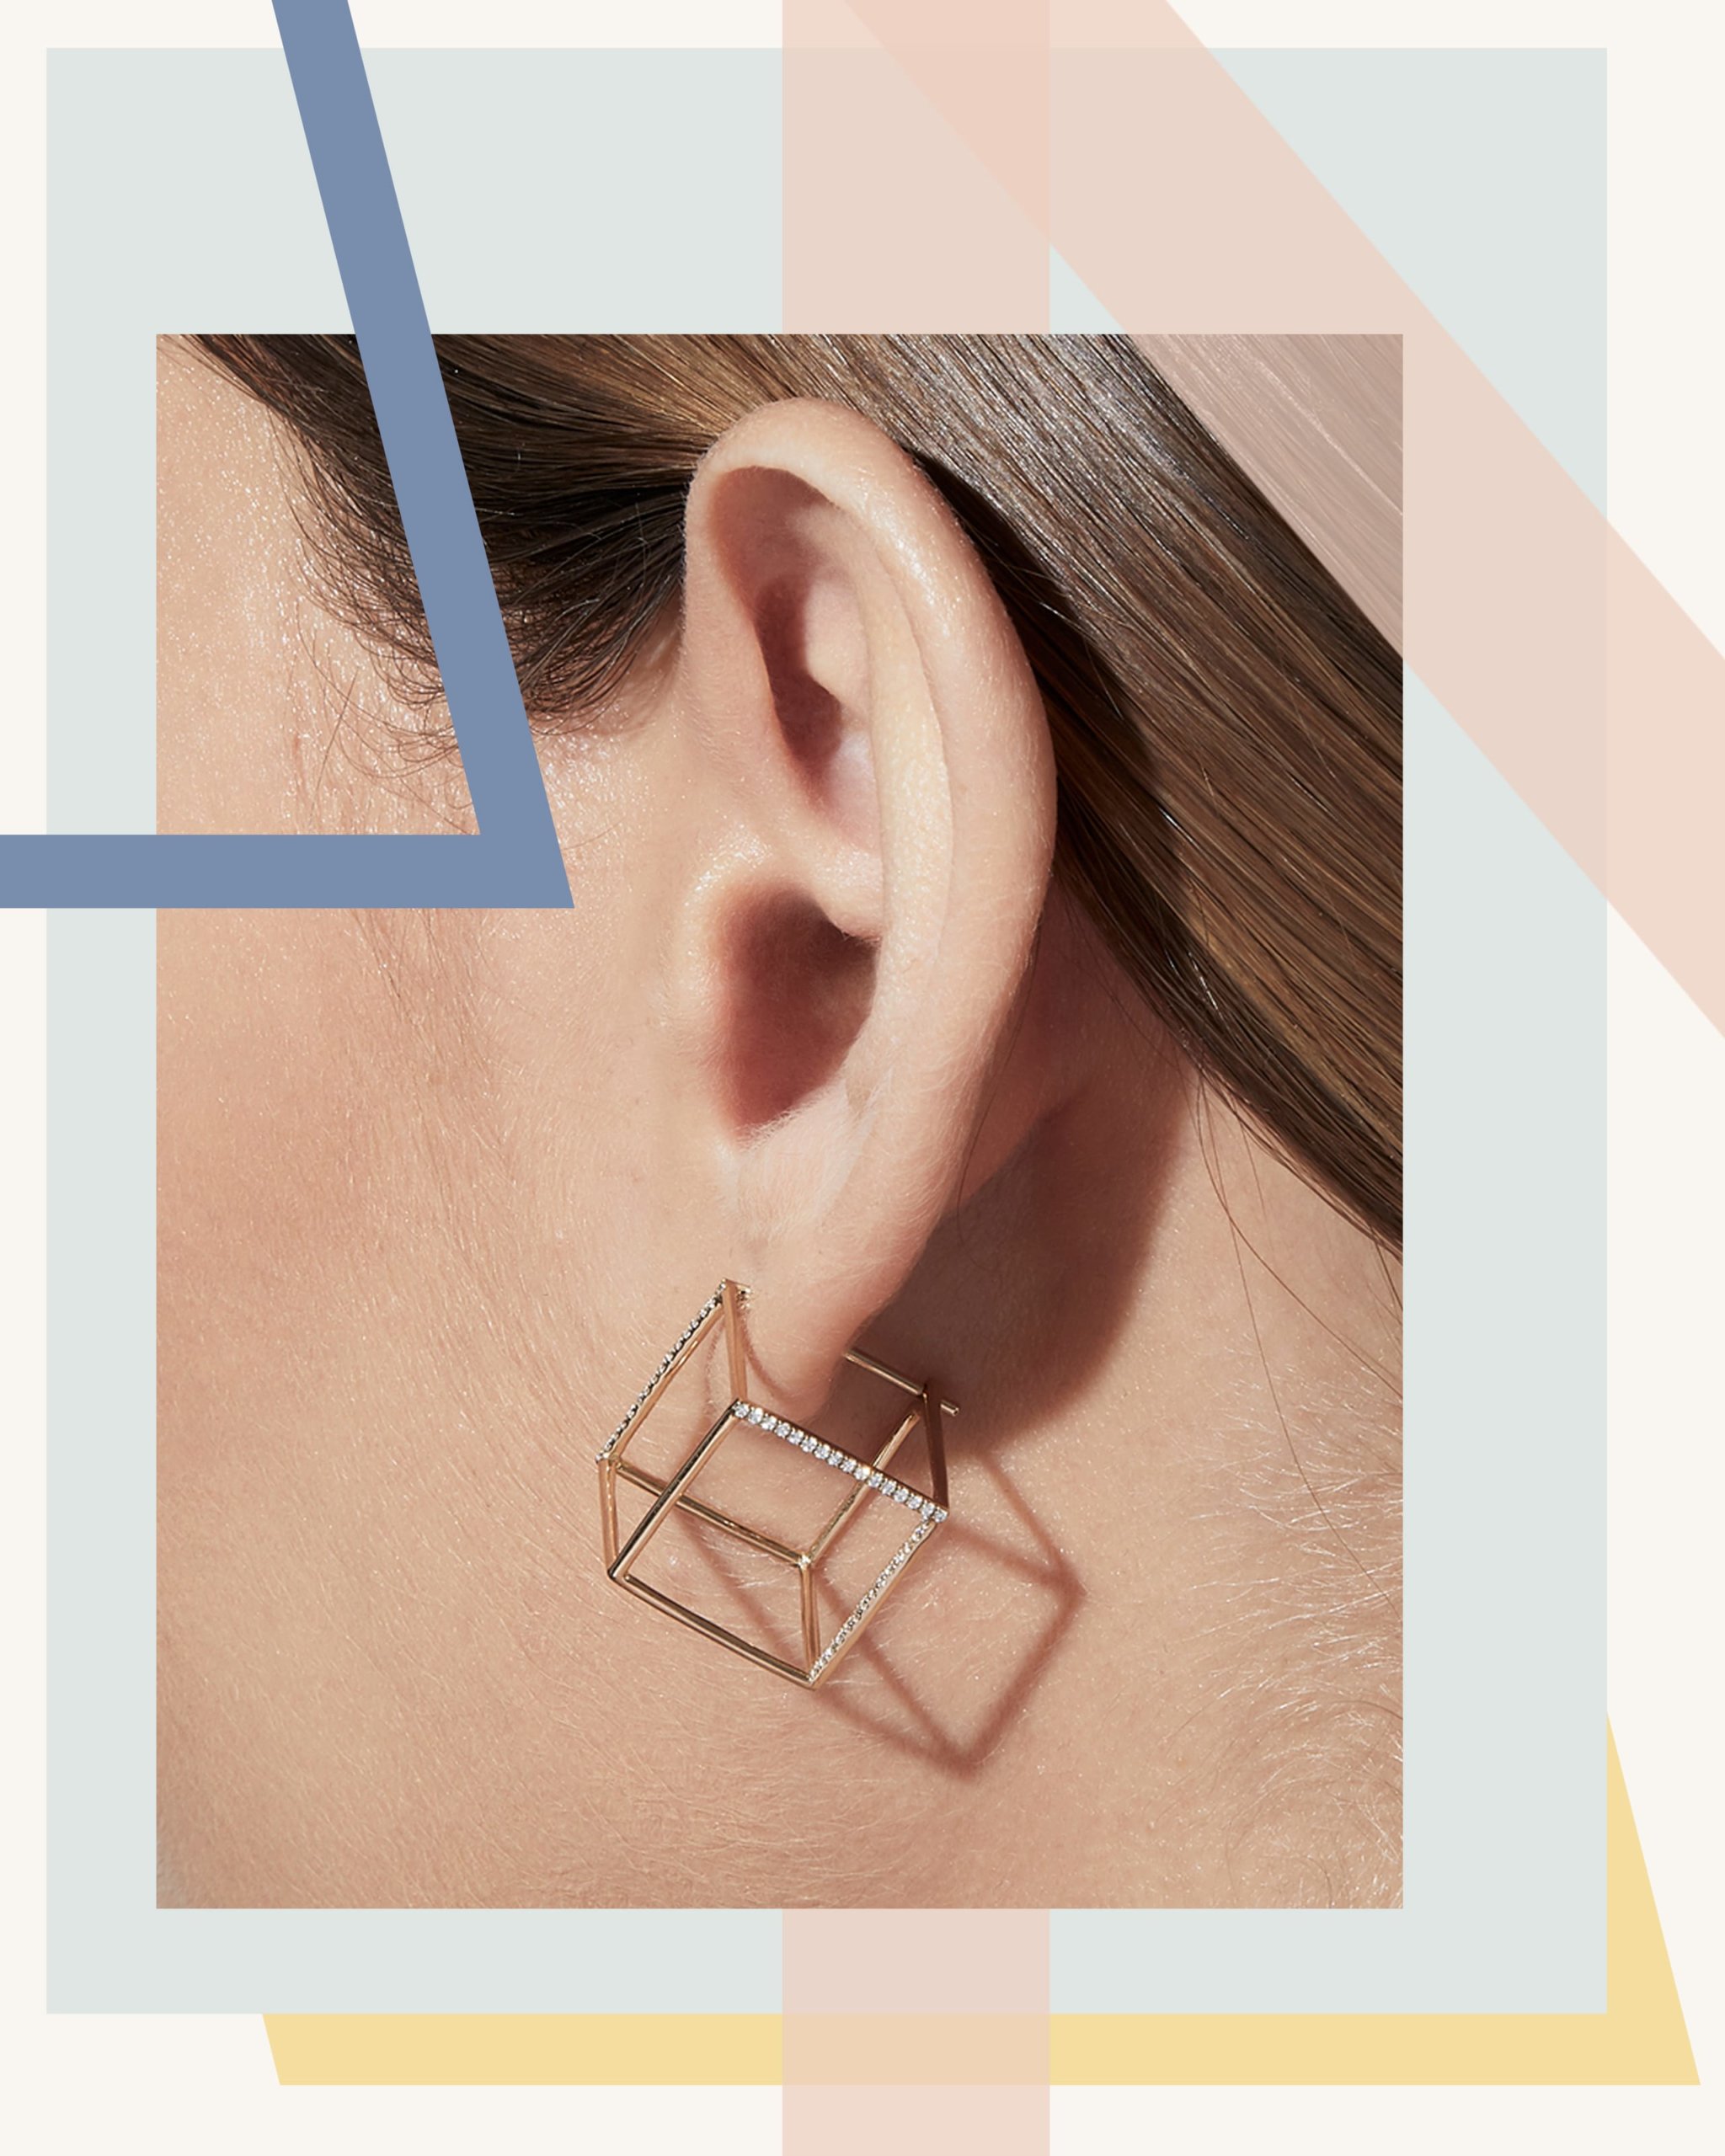 Square diamond earring in gold by Shihara